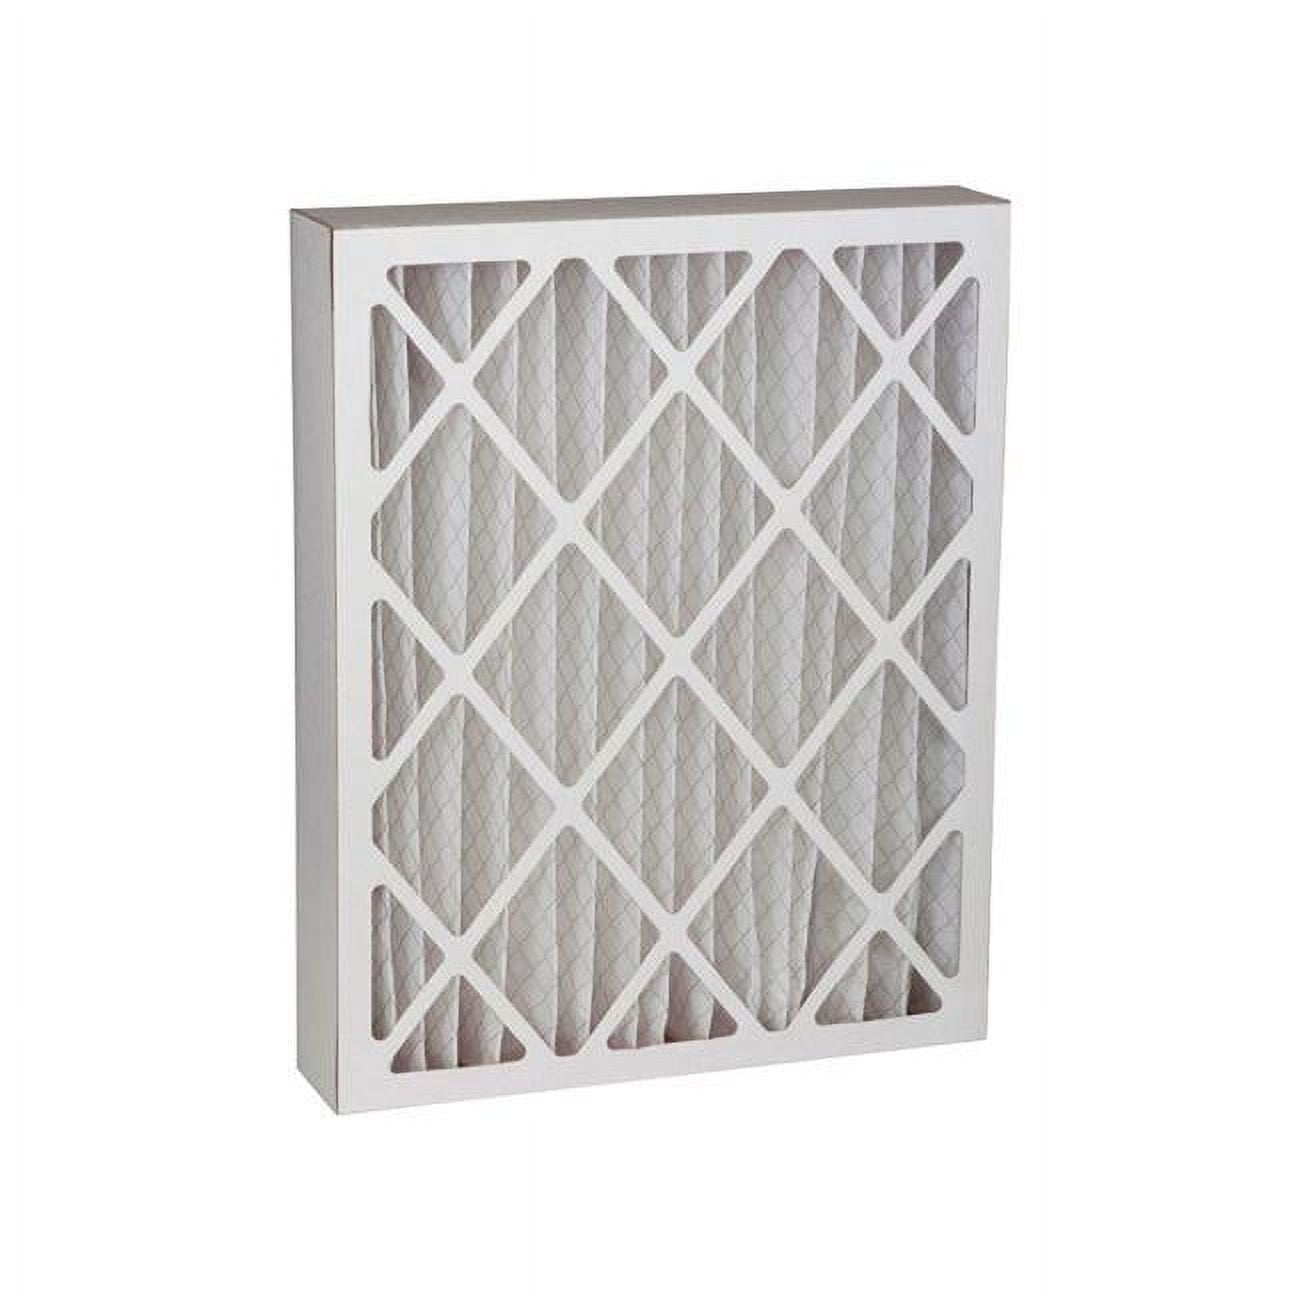 Picture of Bestair 4822995 24 x 24 x 4 in. 8 MERV Pleated Air Filter - Case of 3